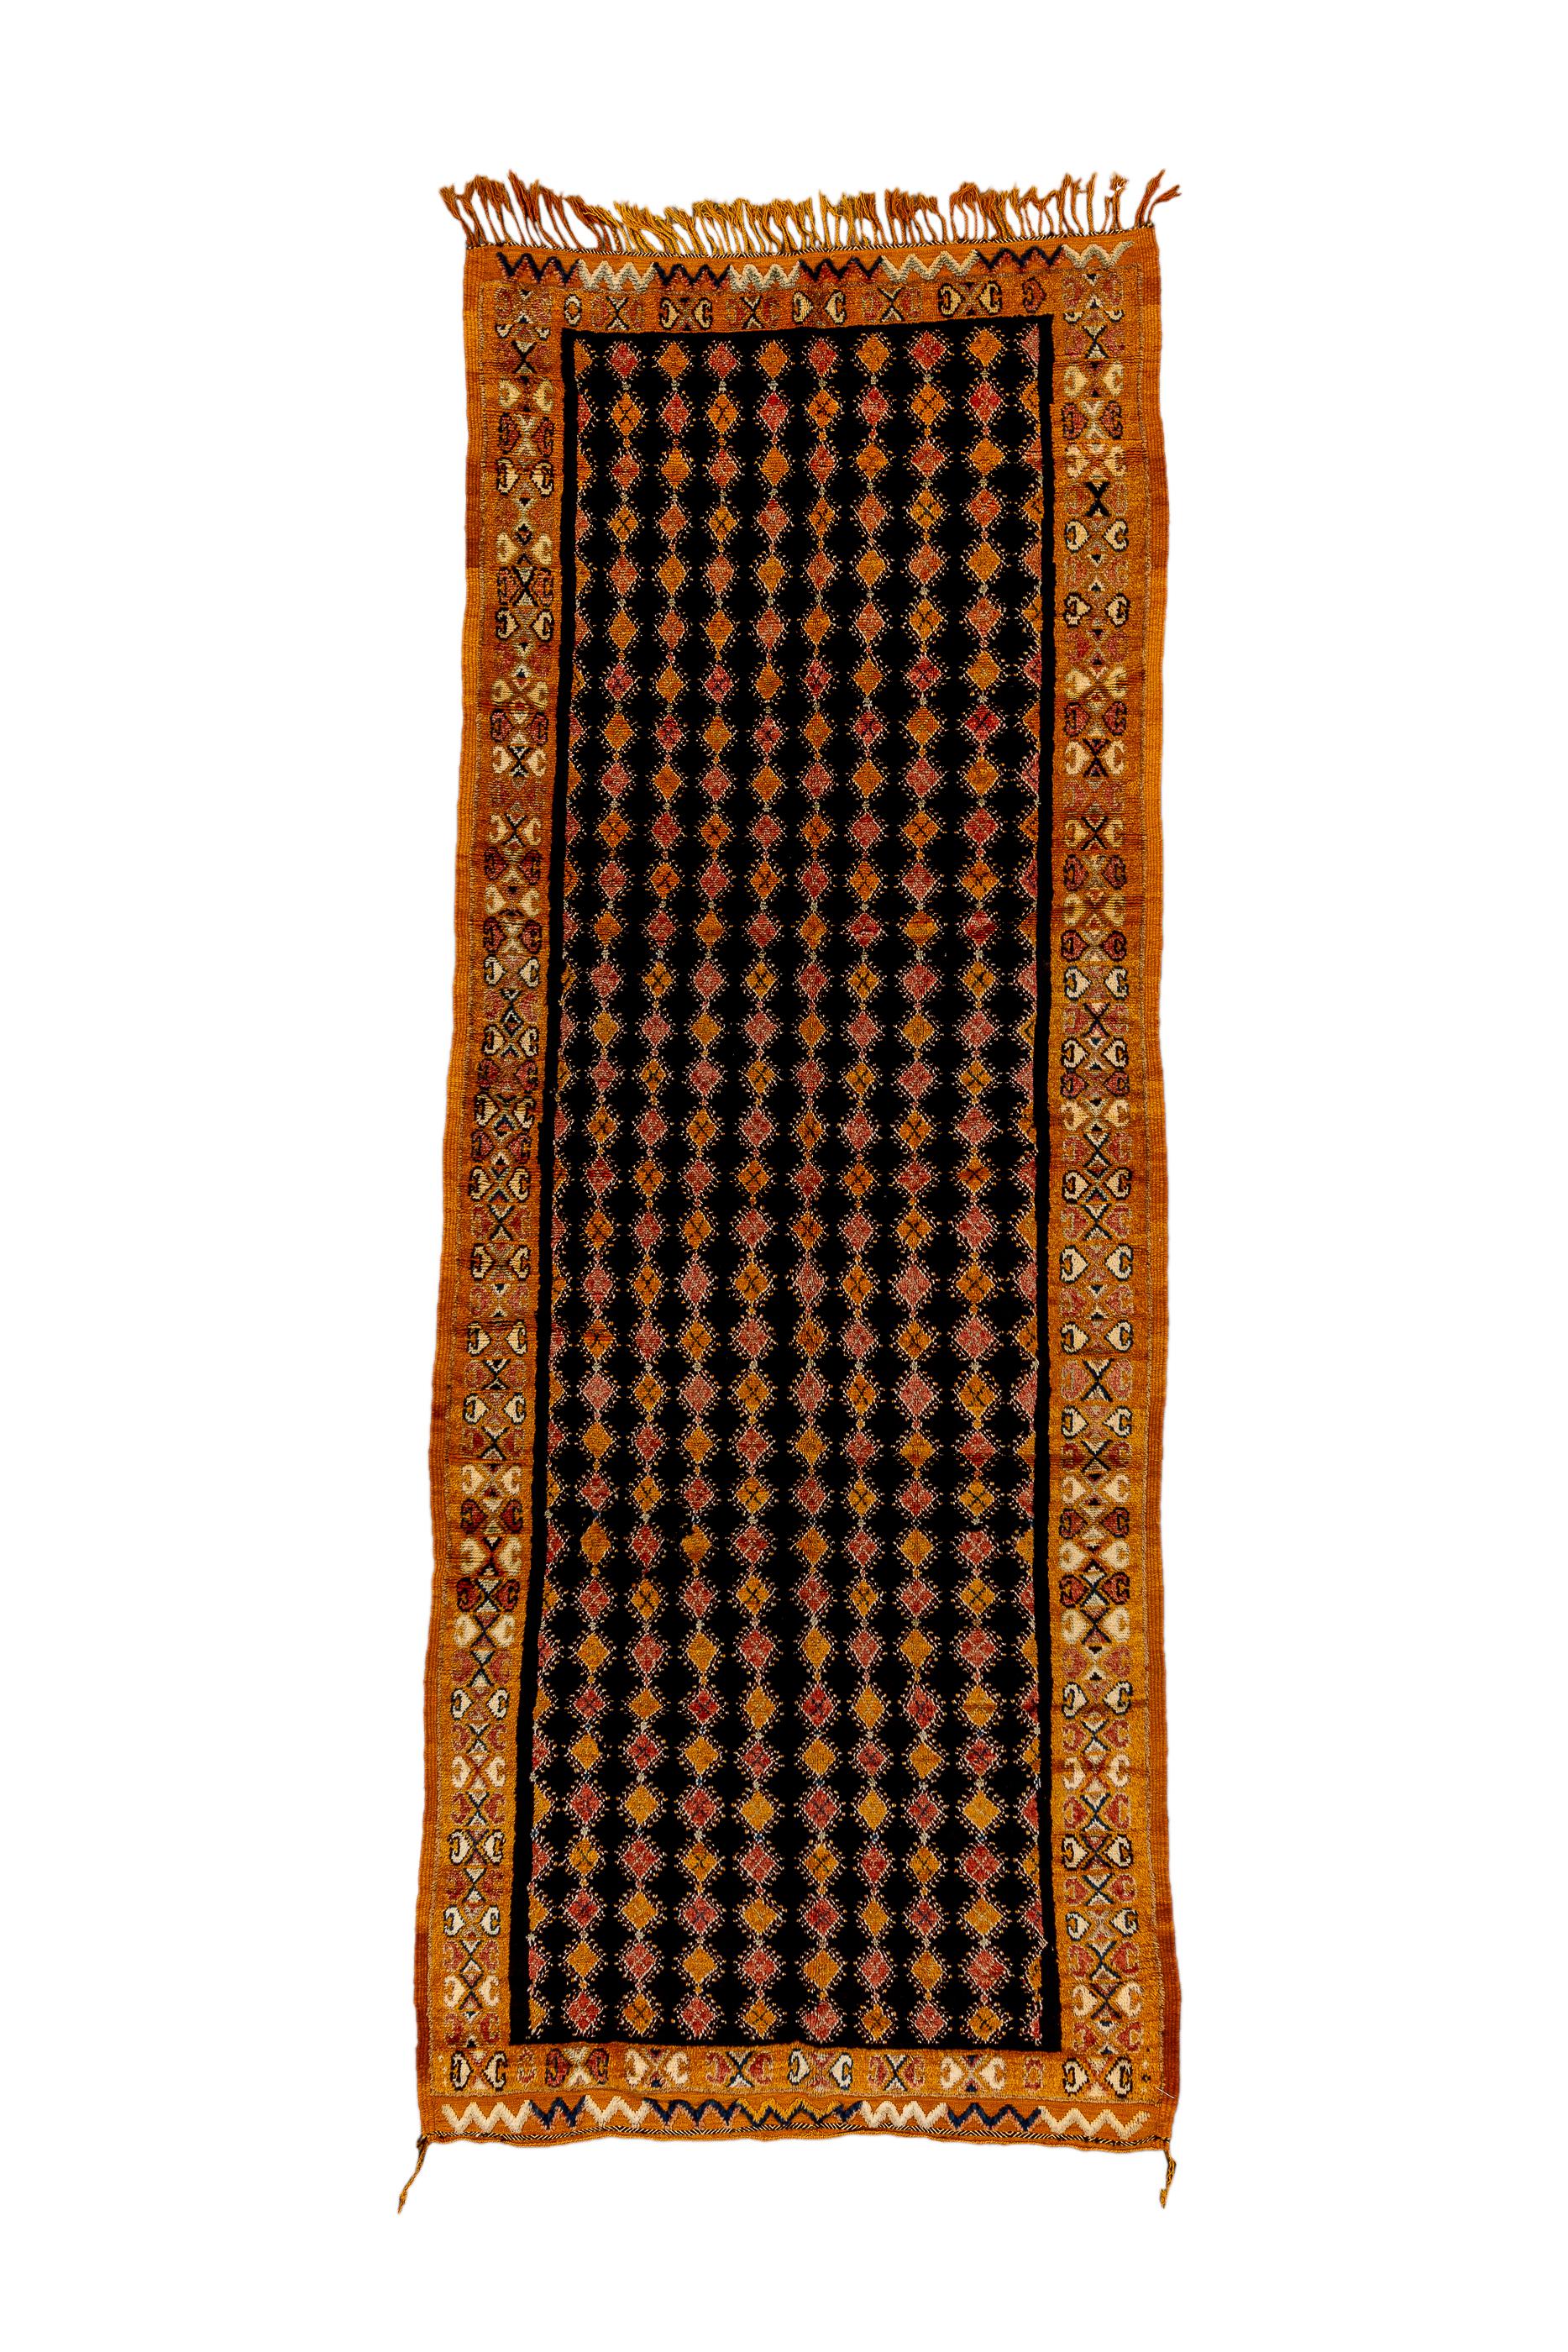 This lowlands piece shows a charcoal field with eight full and two half columns of little diamonds in red and tangerine. Tangerine border with C’s and X’s in a vaguely Turkish style. Narrow rust eteks (extra pile end panels) with polychrome zig-zag